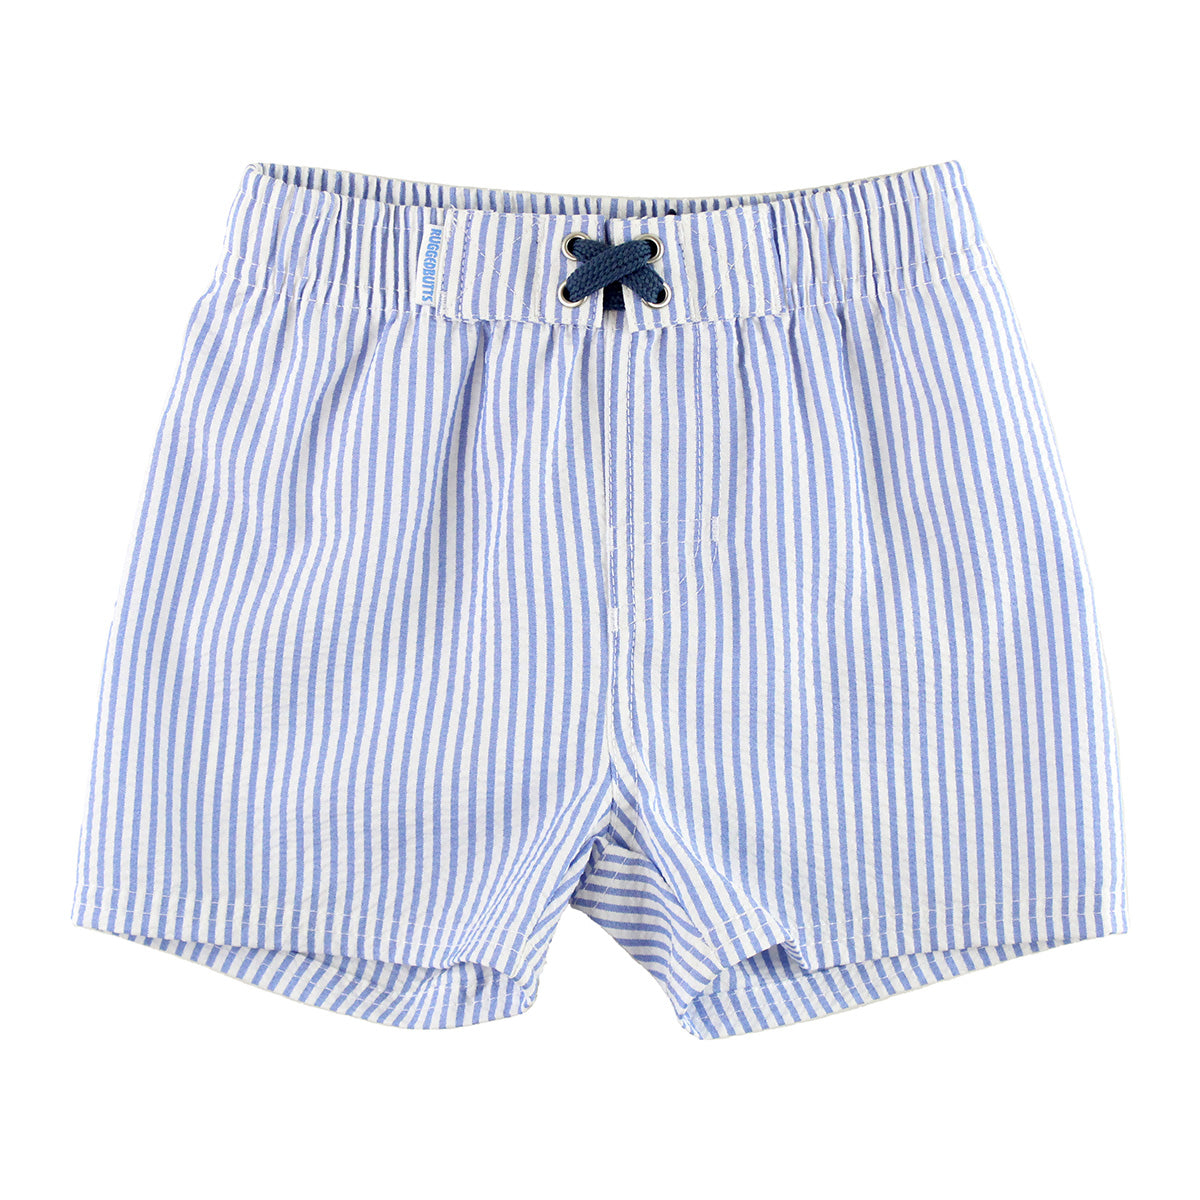 RuggedButts Baby Boy's Periwinkle Stripe Swim Trunks Toddler Swimsuits